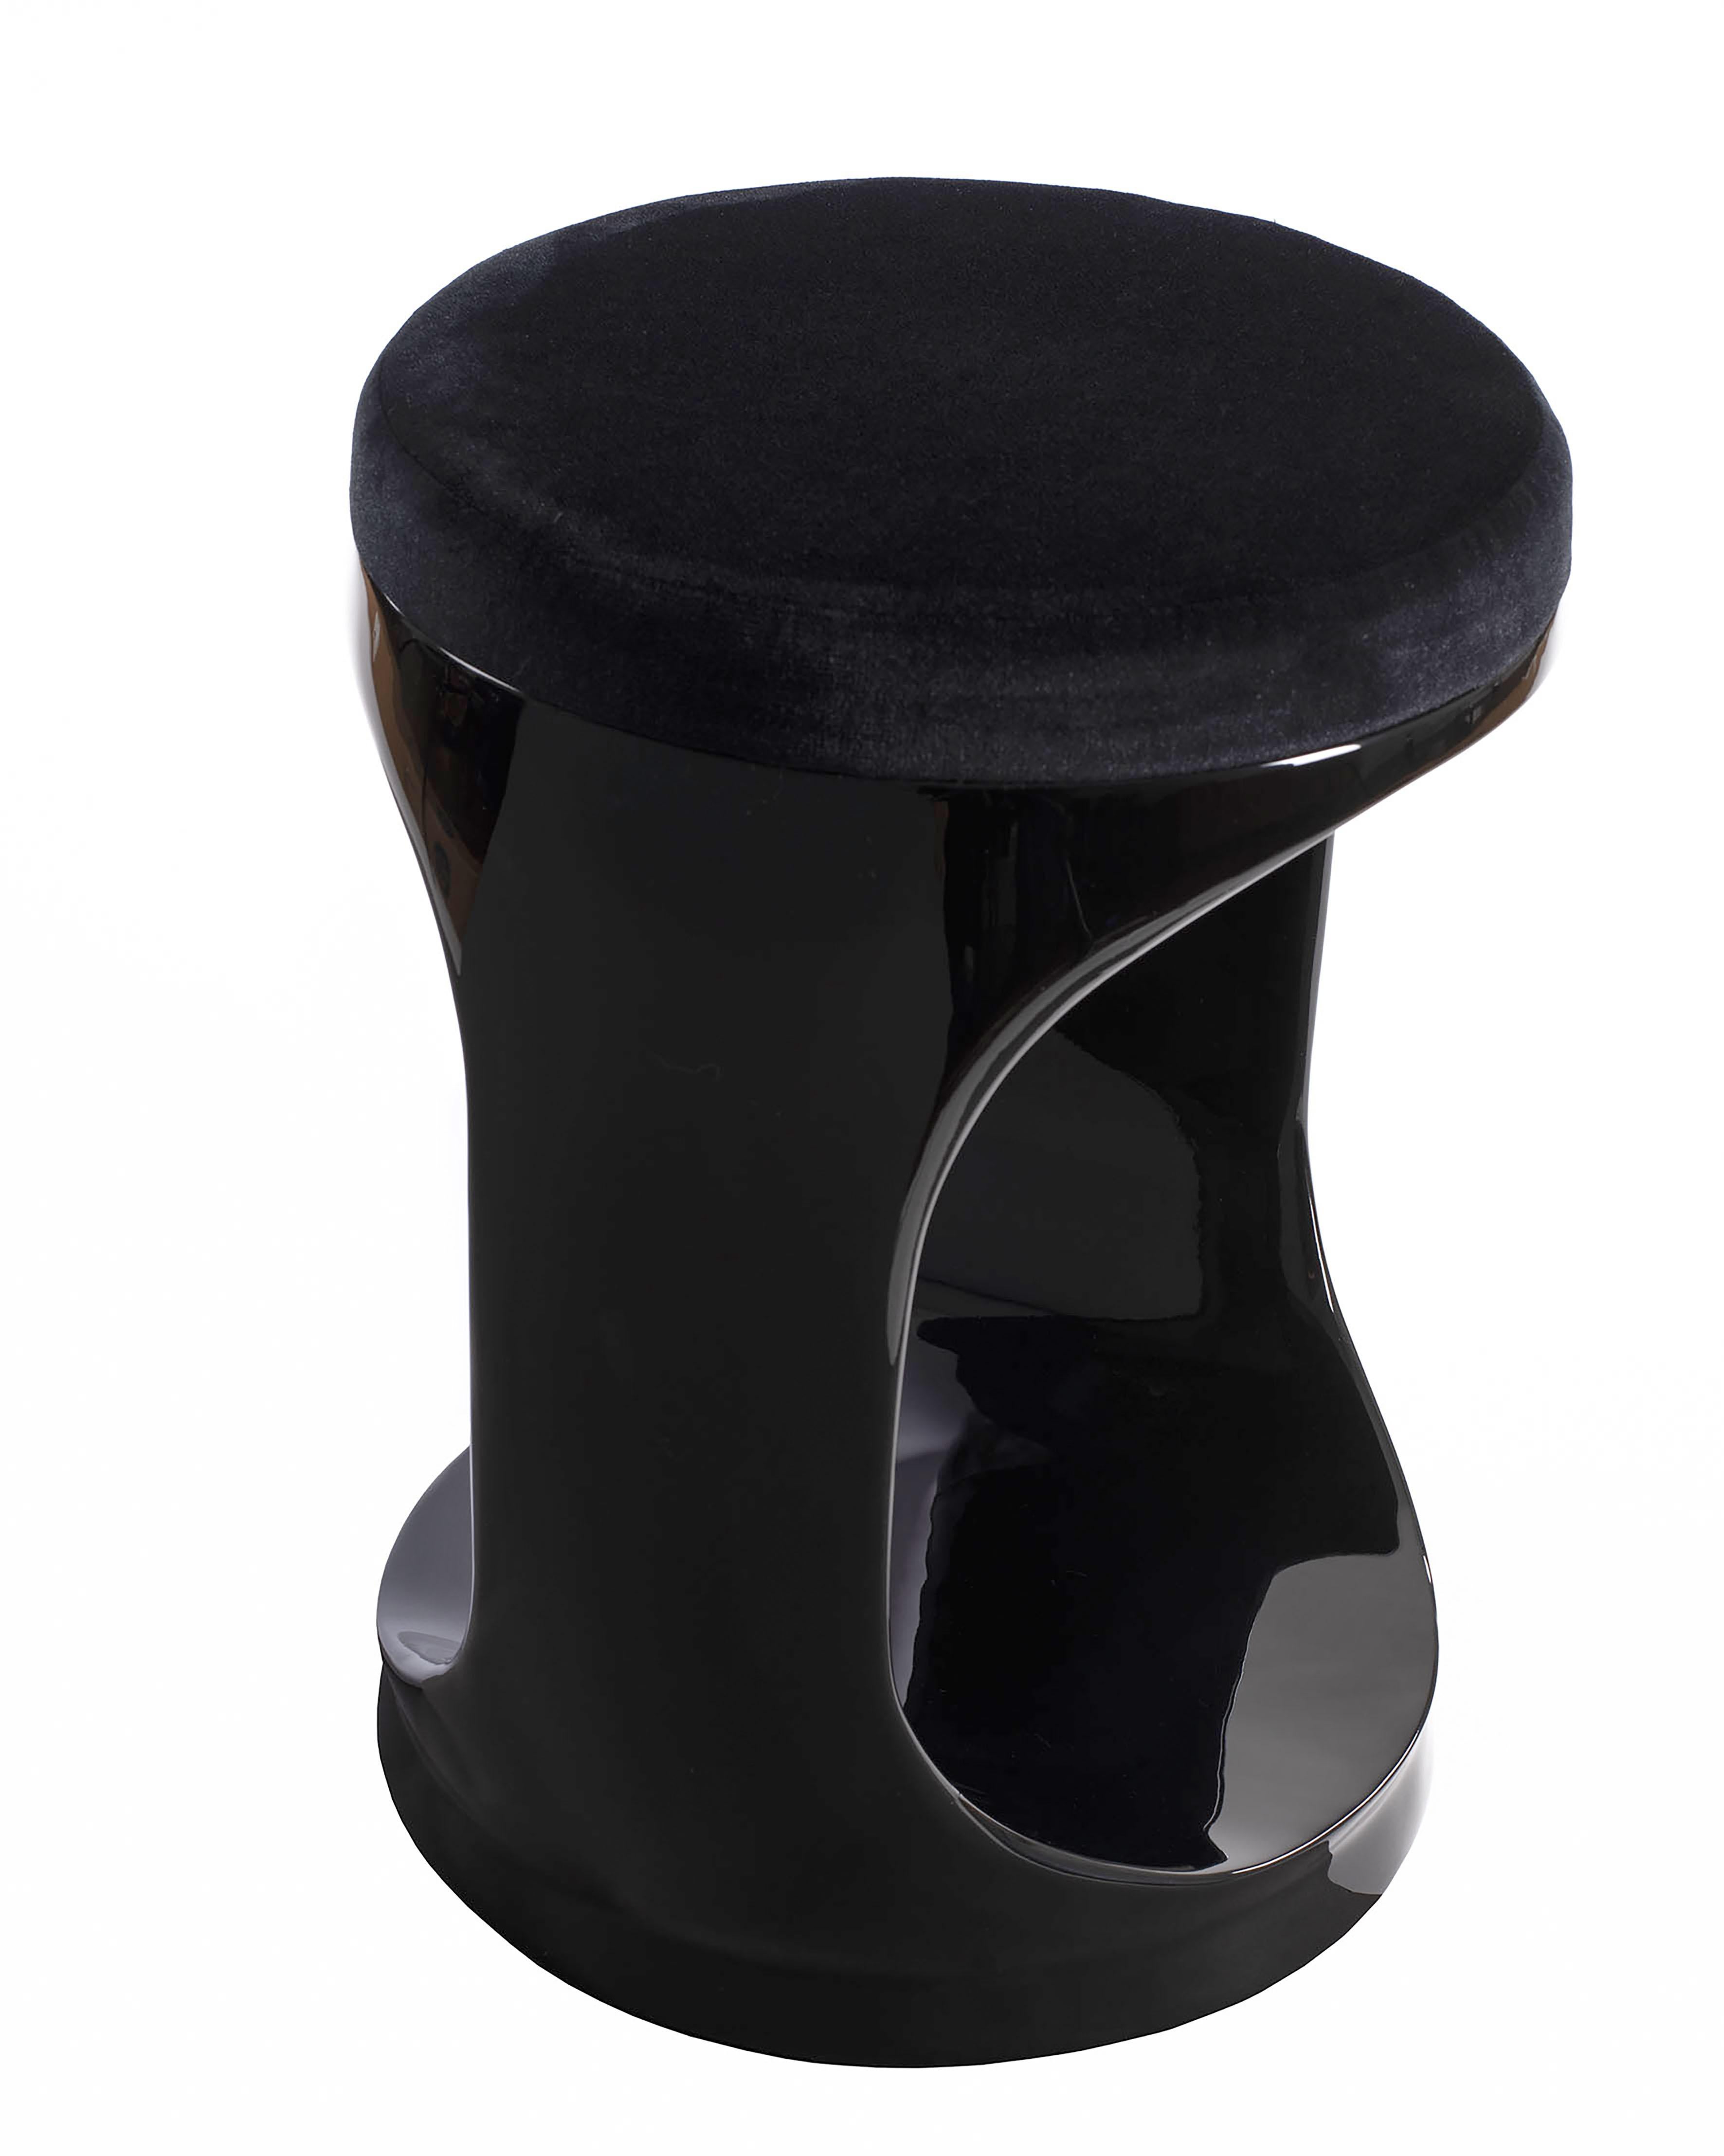 Contemporary Pouf by Cyril Rumpler Signet Ring, Hocker, Stool, black.
These stools are available in a dozen colors and in a glossy finish. The black, white, navy blue, pink, red, turquoise, lilac, brown, green, and grey stools are available with a